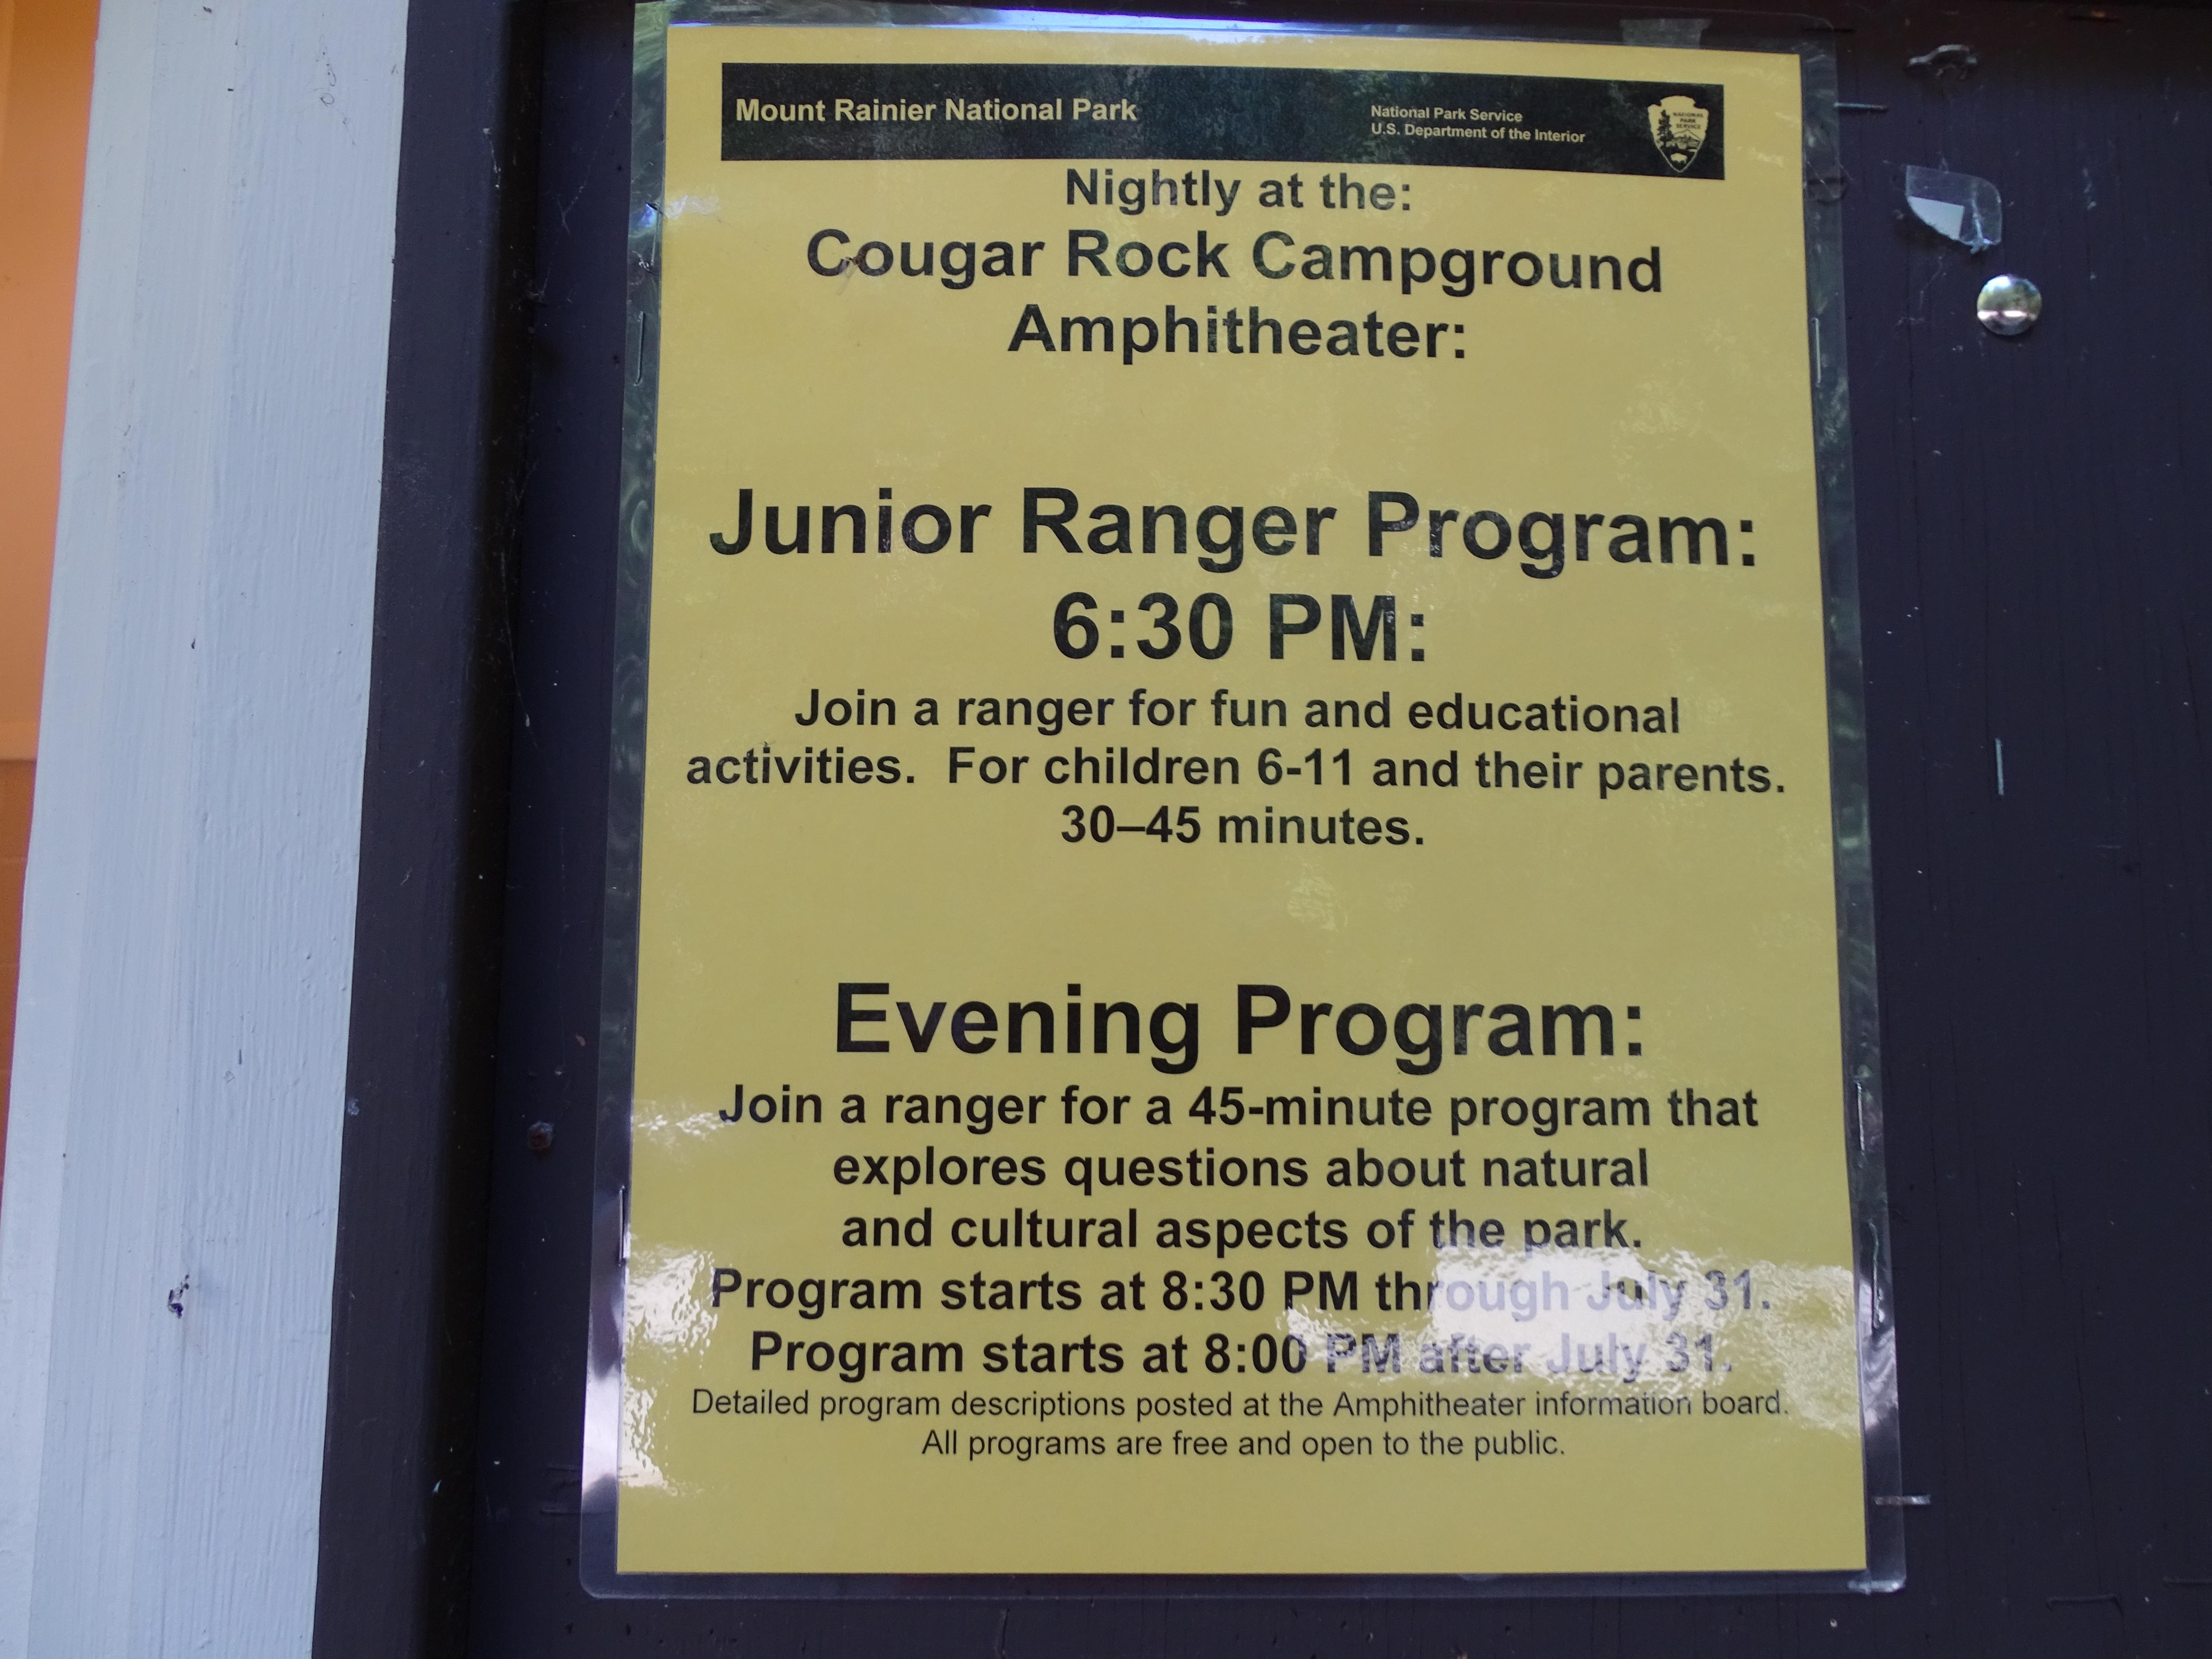 A yellow flyer noting the times of programs.